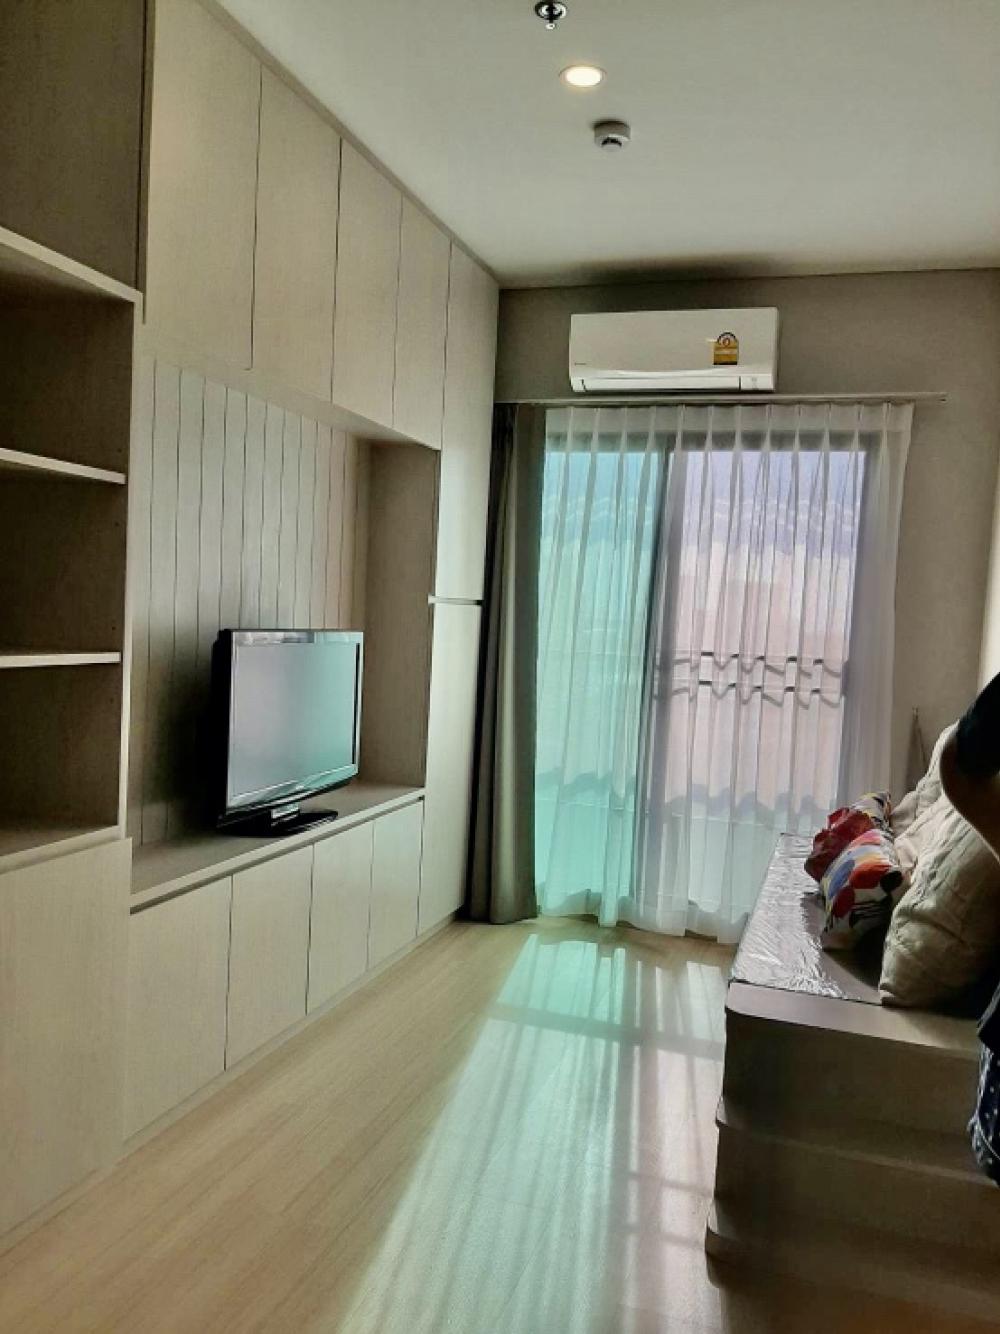 For RentCondoRatchathewi,Phayathai : ❤️❤️ Lumpini Suite Condo for rent, Din Daeng-Ratchaprarop, ready to move in this 1 May, 12 A floor, beautiful room, fully furnished, 1 bedroom, 1 bathroom, room size 30 sq m, 1 year contract, price includes parking, only 14,000 baht. only Interested in li